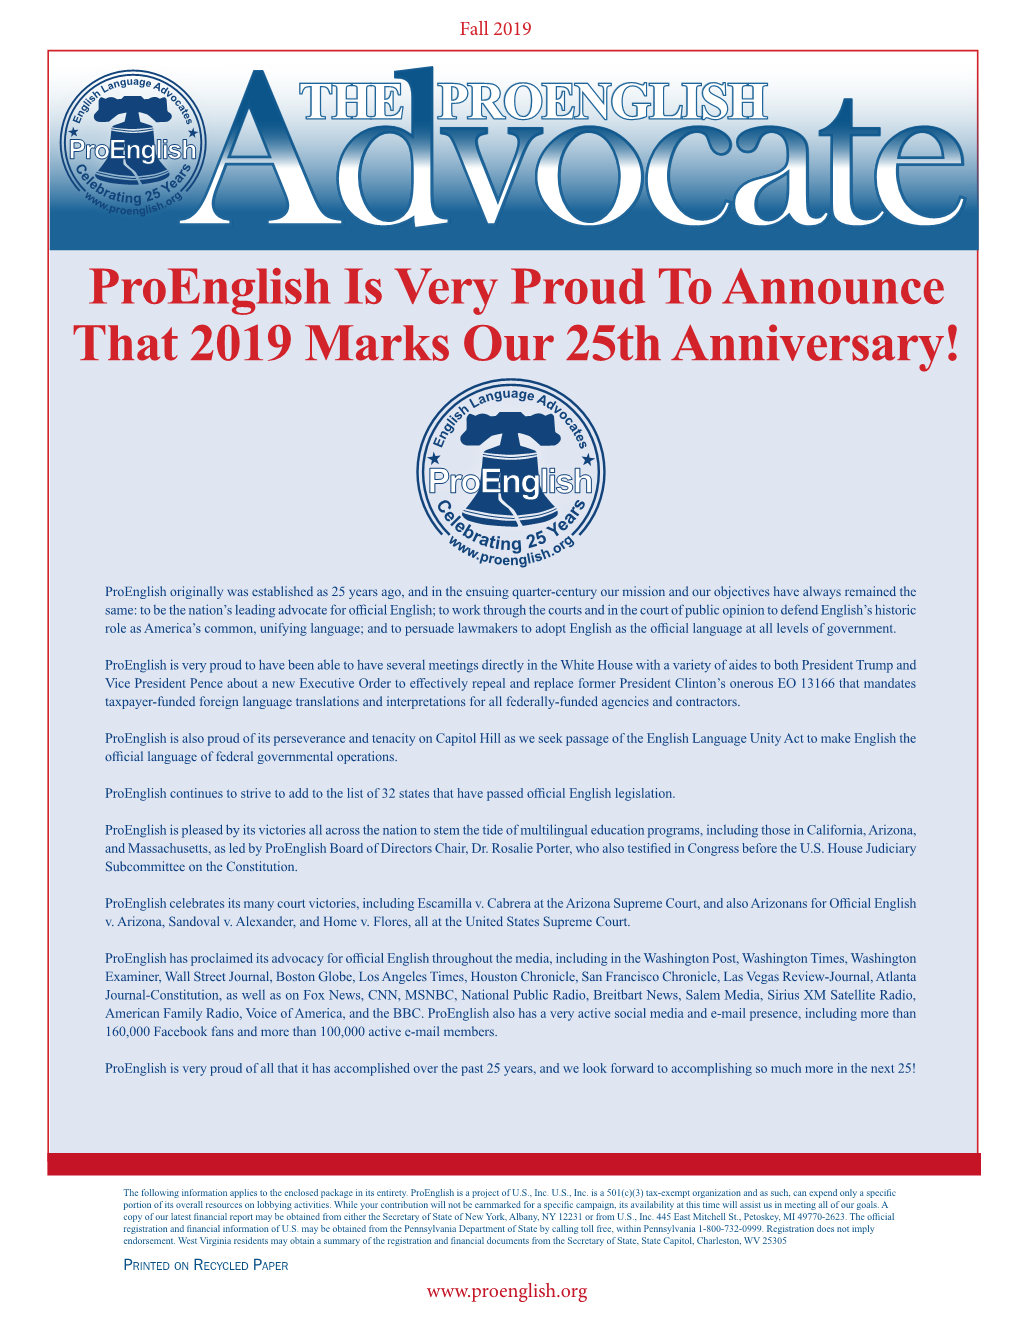 Proenglish Is Very Proud to Announce That 2019 Marks Our 25Th Anniversary!